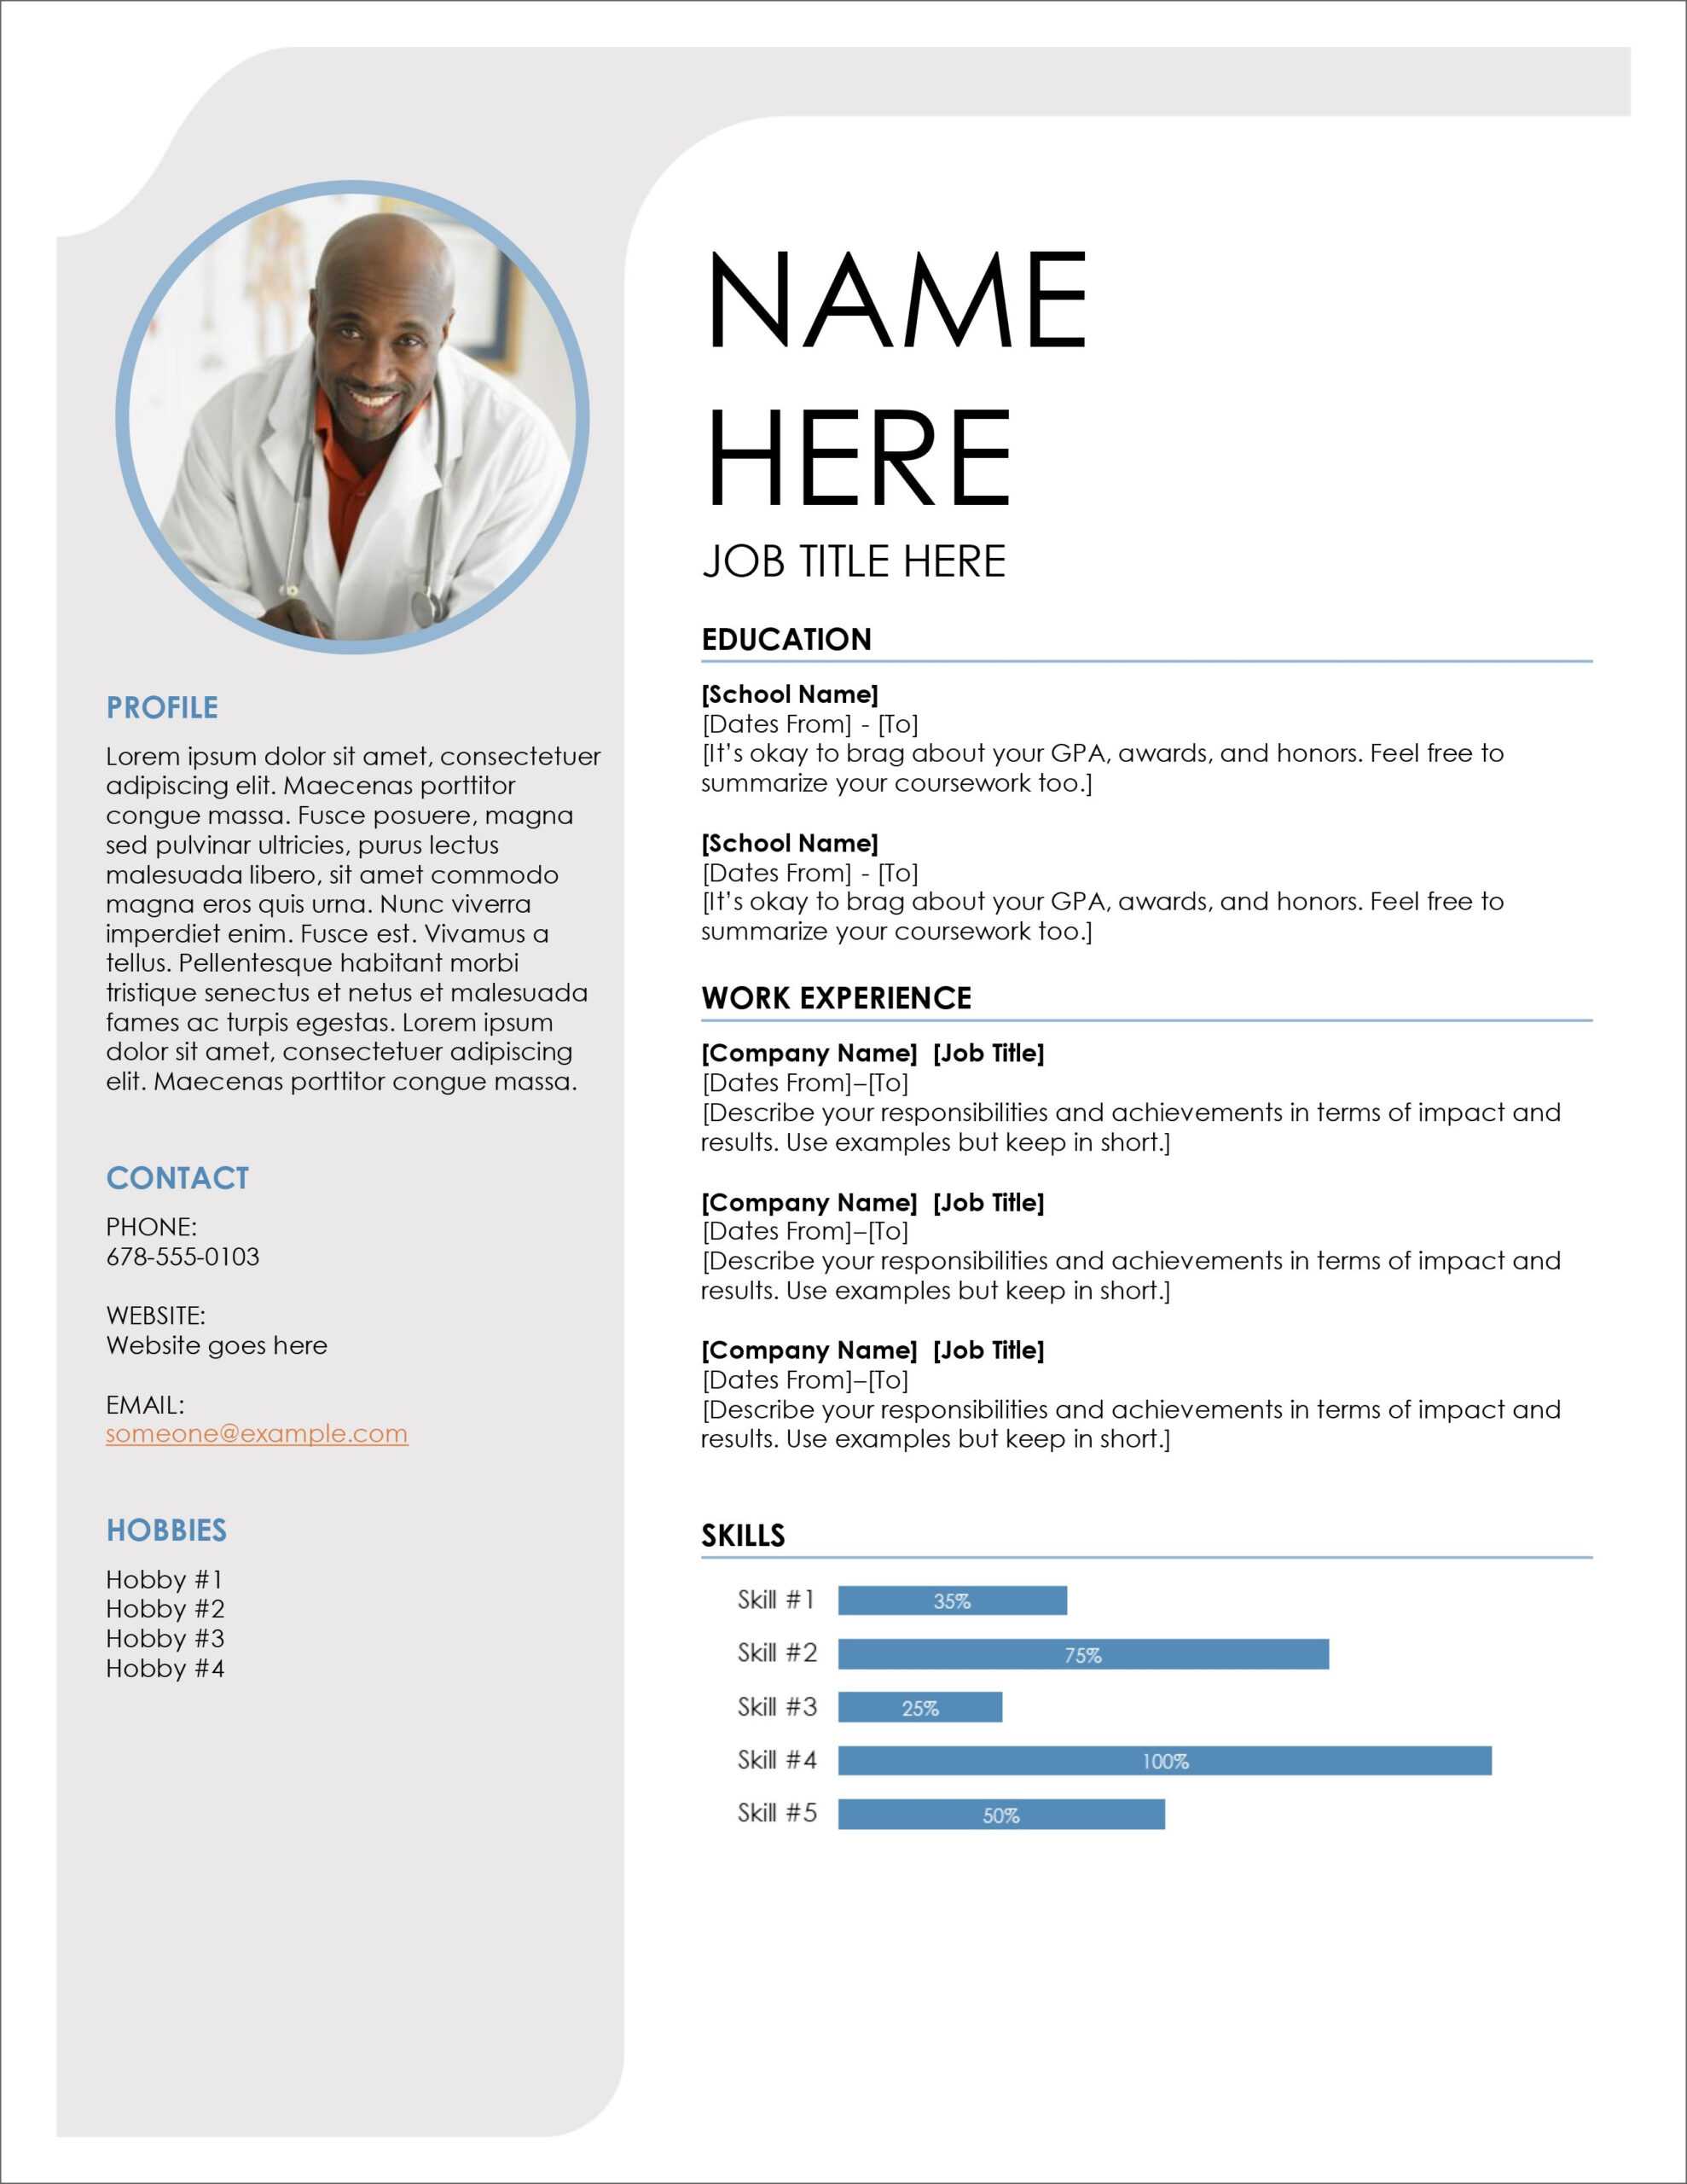 Cv Format Professional Free Download Downloadable Resume With Free Downloadable Resume Templates For Word